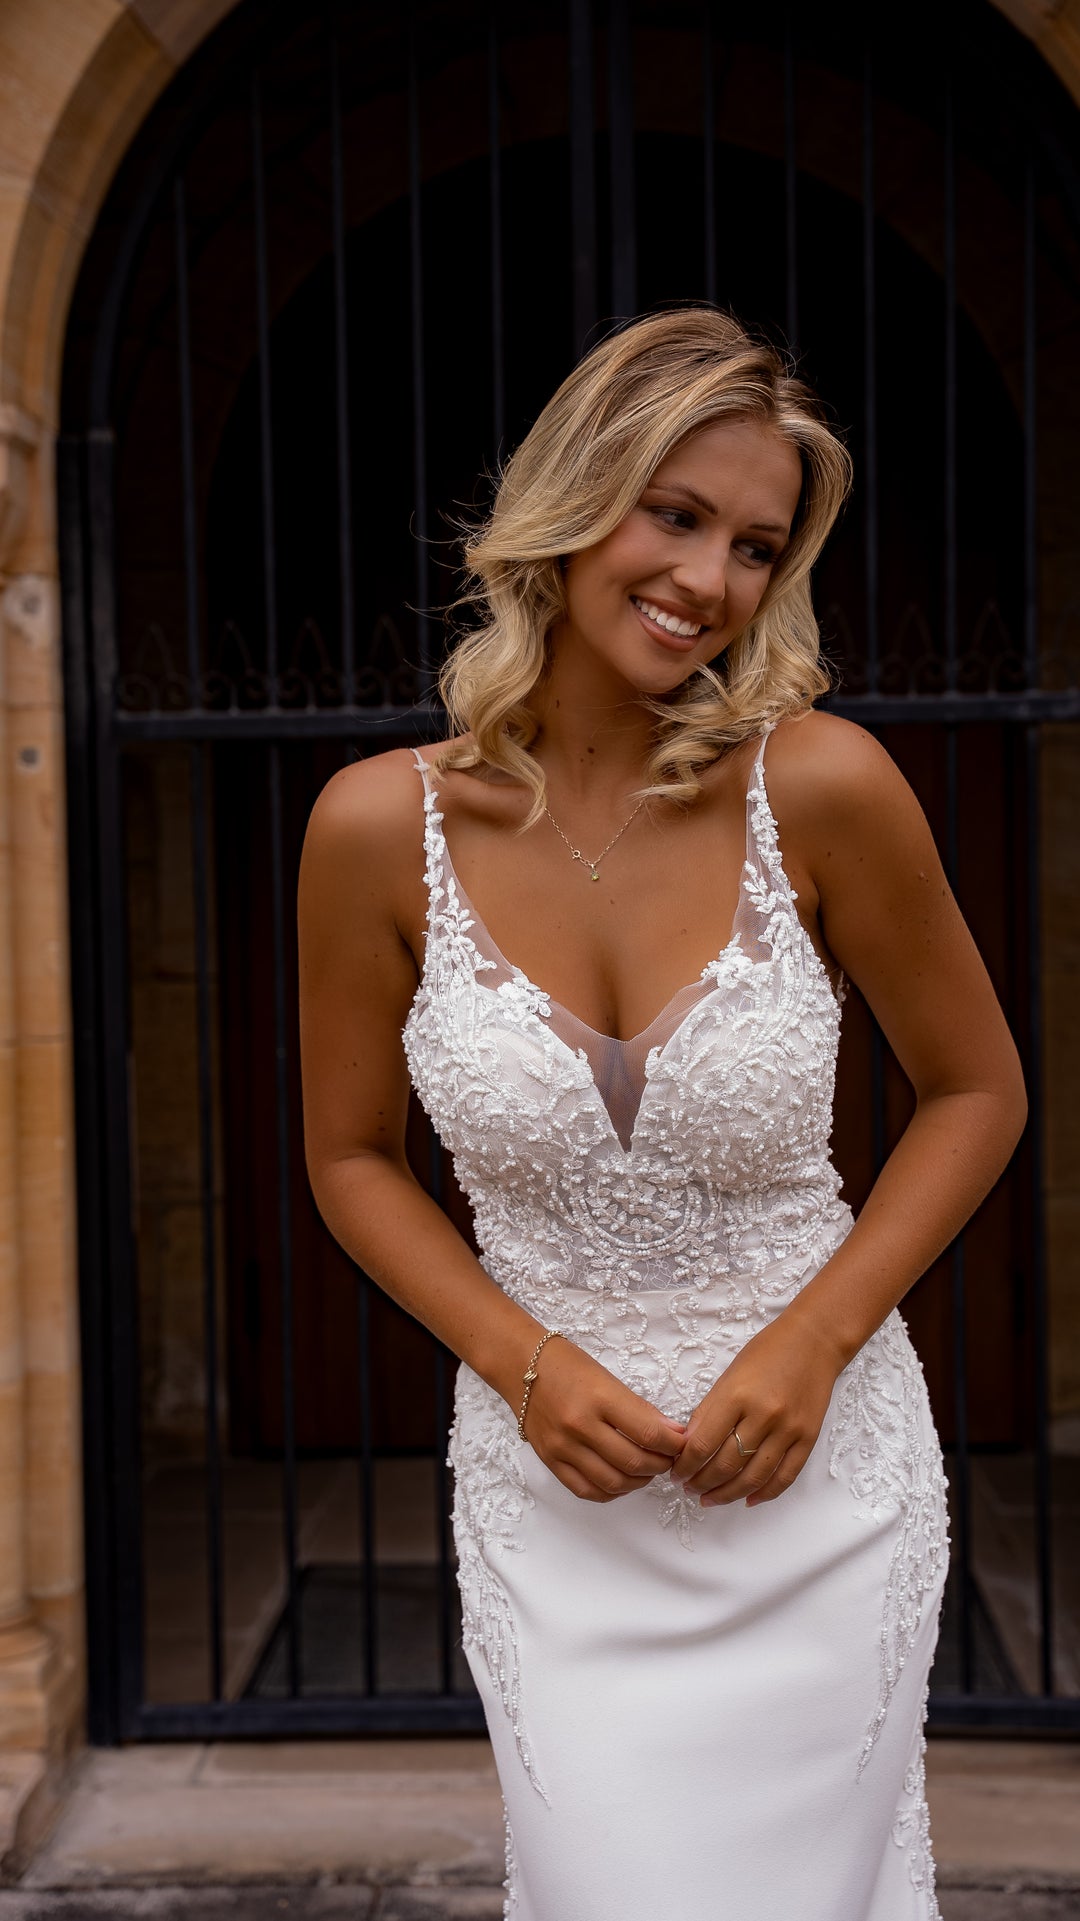 How To Choose Bridal Shapewear & Lingerie For Your Wedding Day